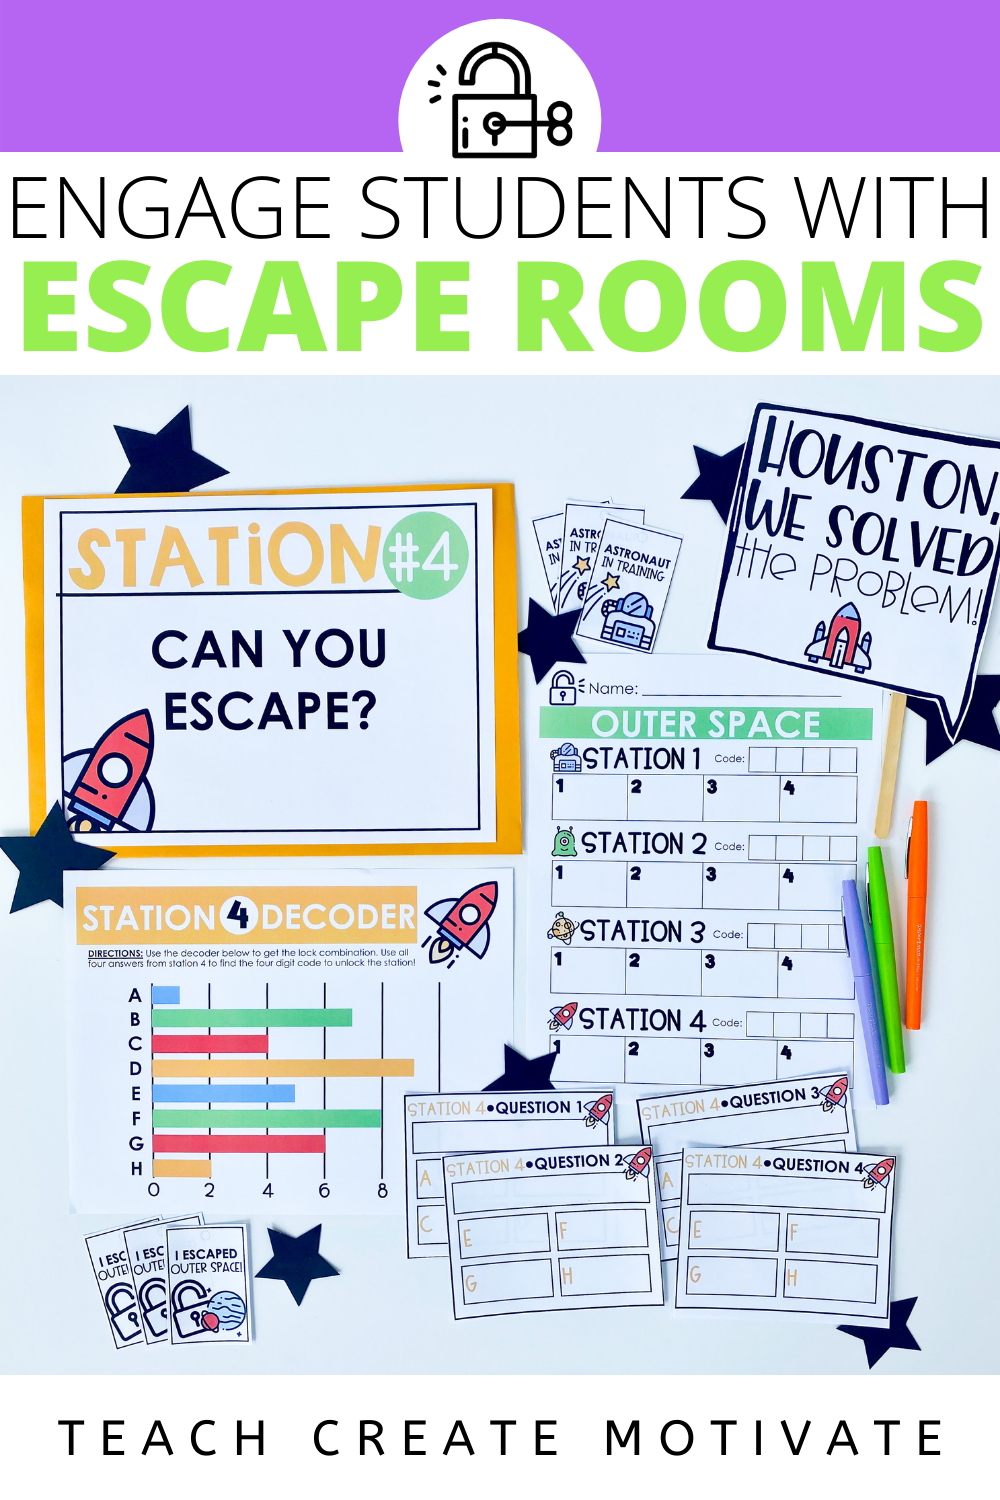 Escape rooms are a great way to increase student engagement! Your elementary students will love these escape room puzzles. The DIY escape room templates let you add your content. Ready to use digital or printable versions. It includes props, so you can even do an escape room classroom transformation if you want. These escape room ideas for kids come in different themes, so you can use them throughout the school year. (Kinder, 1st grade, 2nd grade, 3rd grade, 4th grade, 5th grade, middle school)